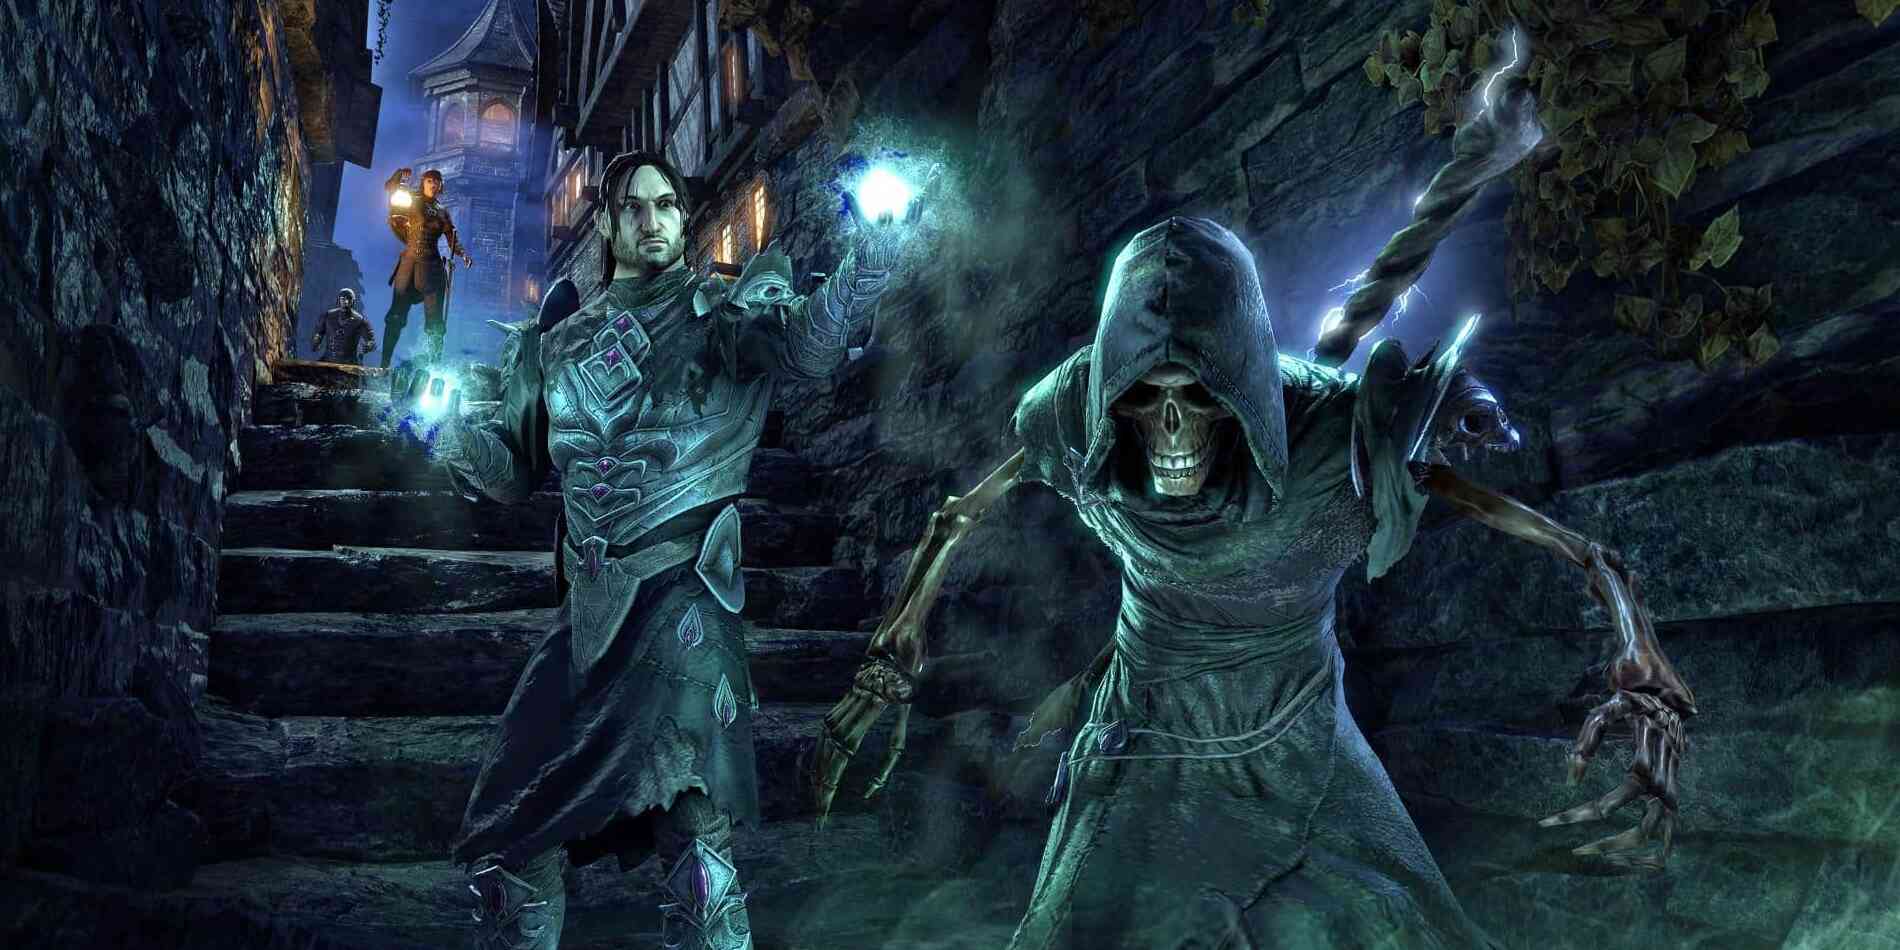 The Elder Scrolls Online: Necrom expansion launches June 5 for PC